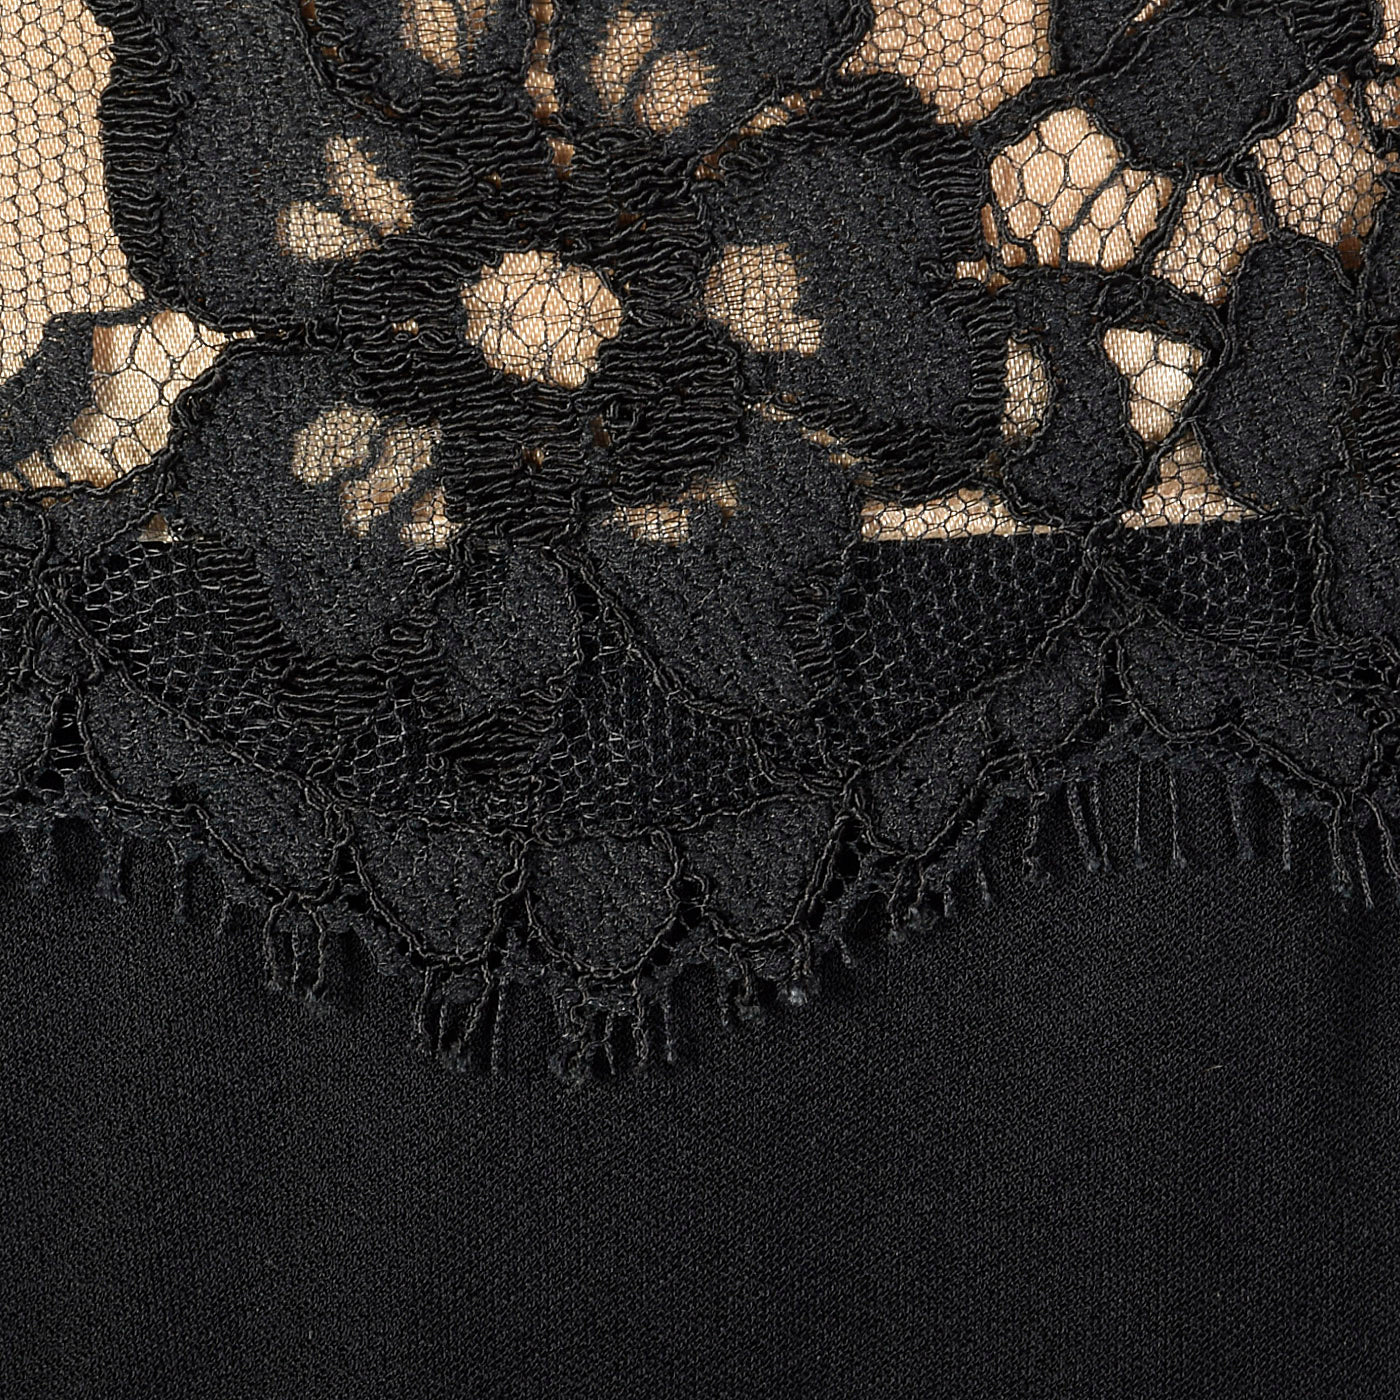 1980s Black Dress with Illusion Lace